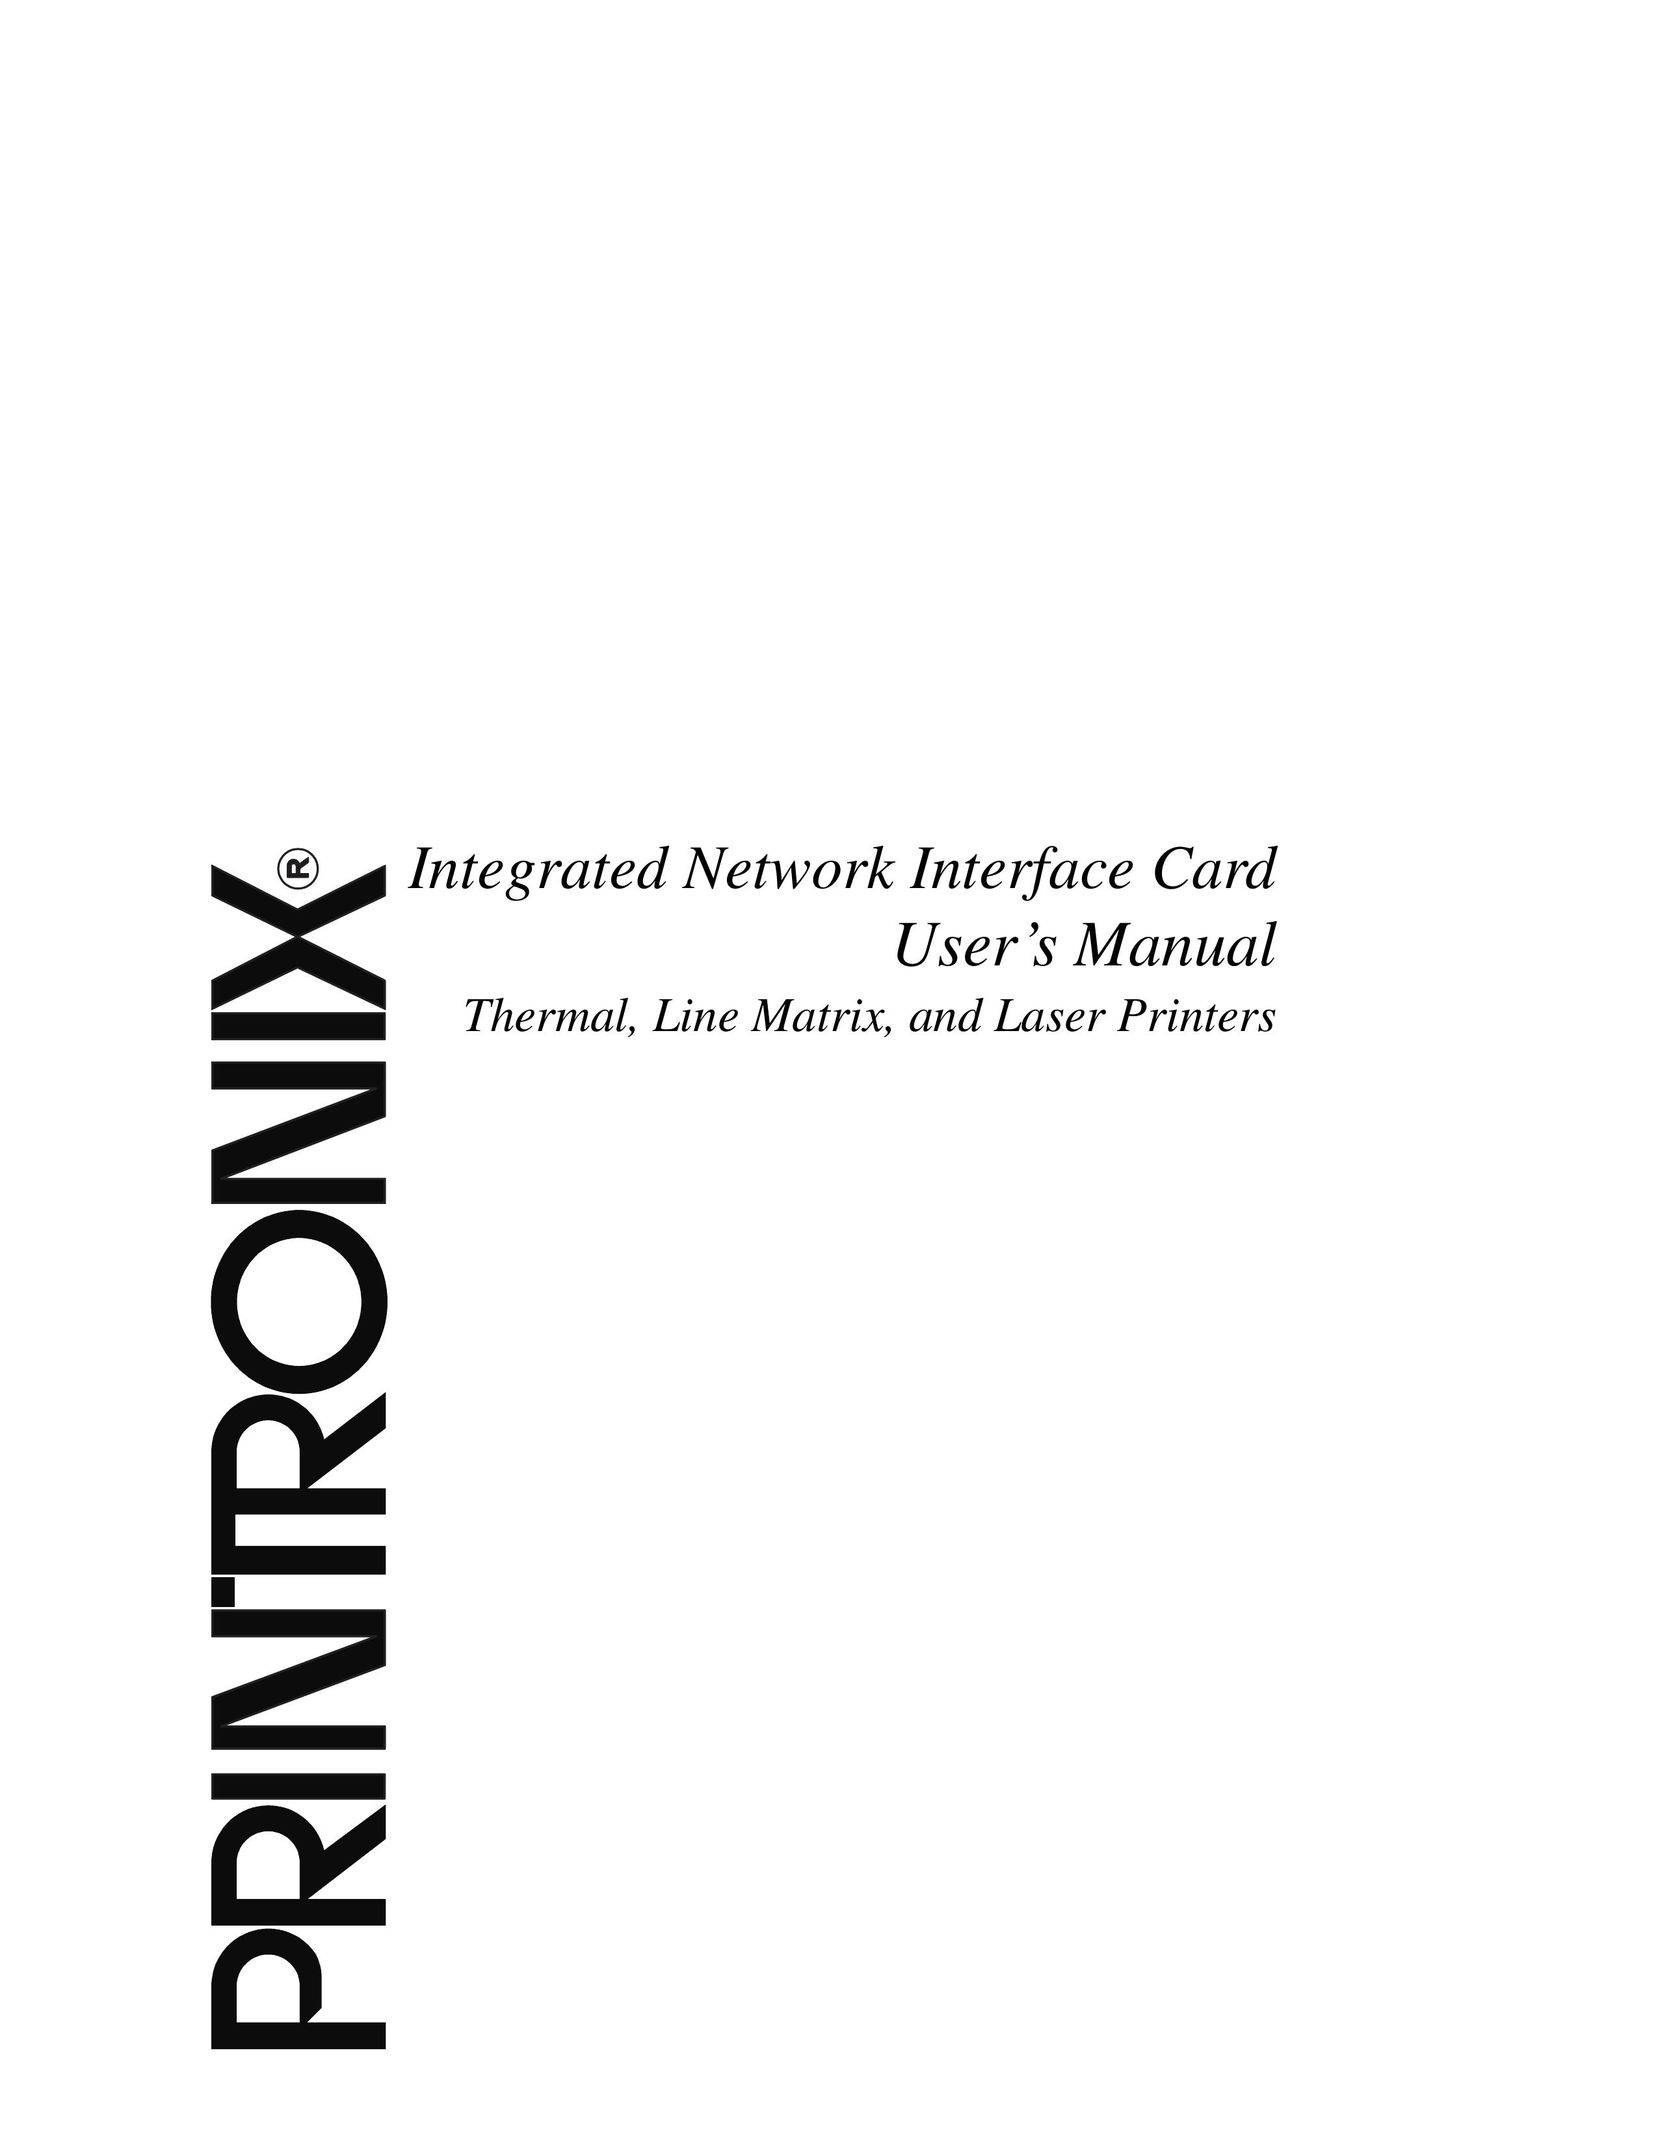 Printronix Integrated Network Interface Card Network Card User Manual